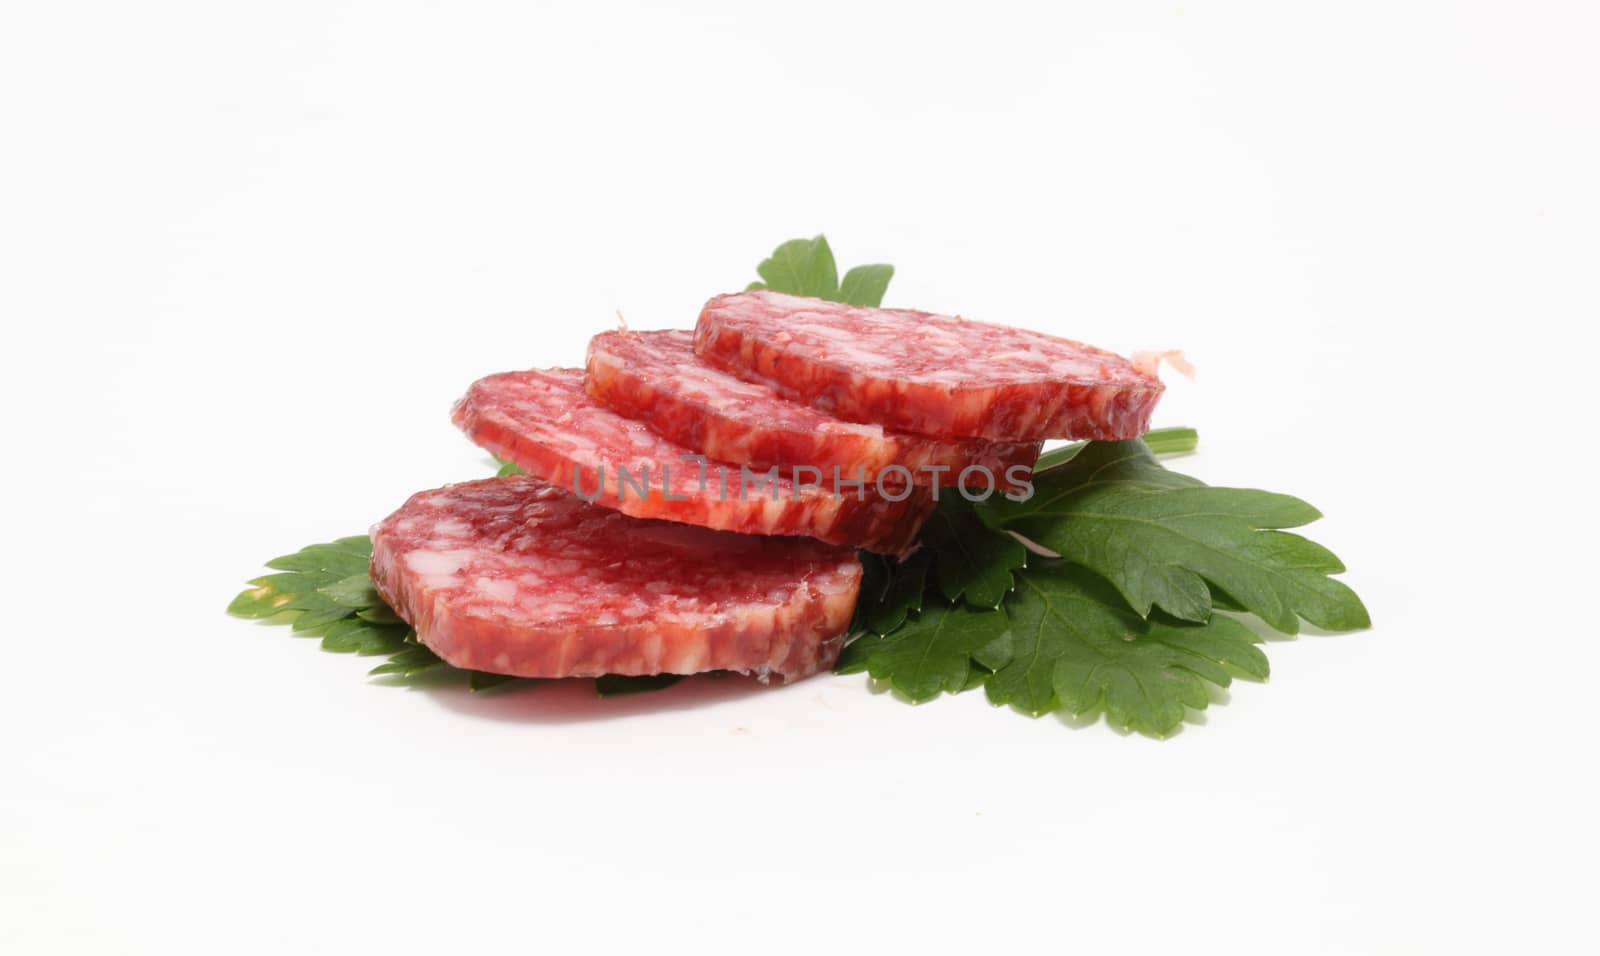 sausages and parsley on a white background